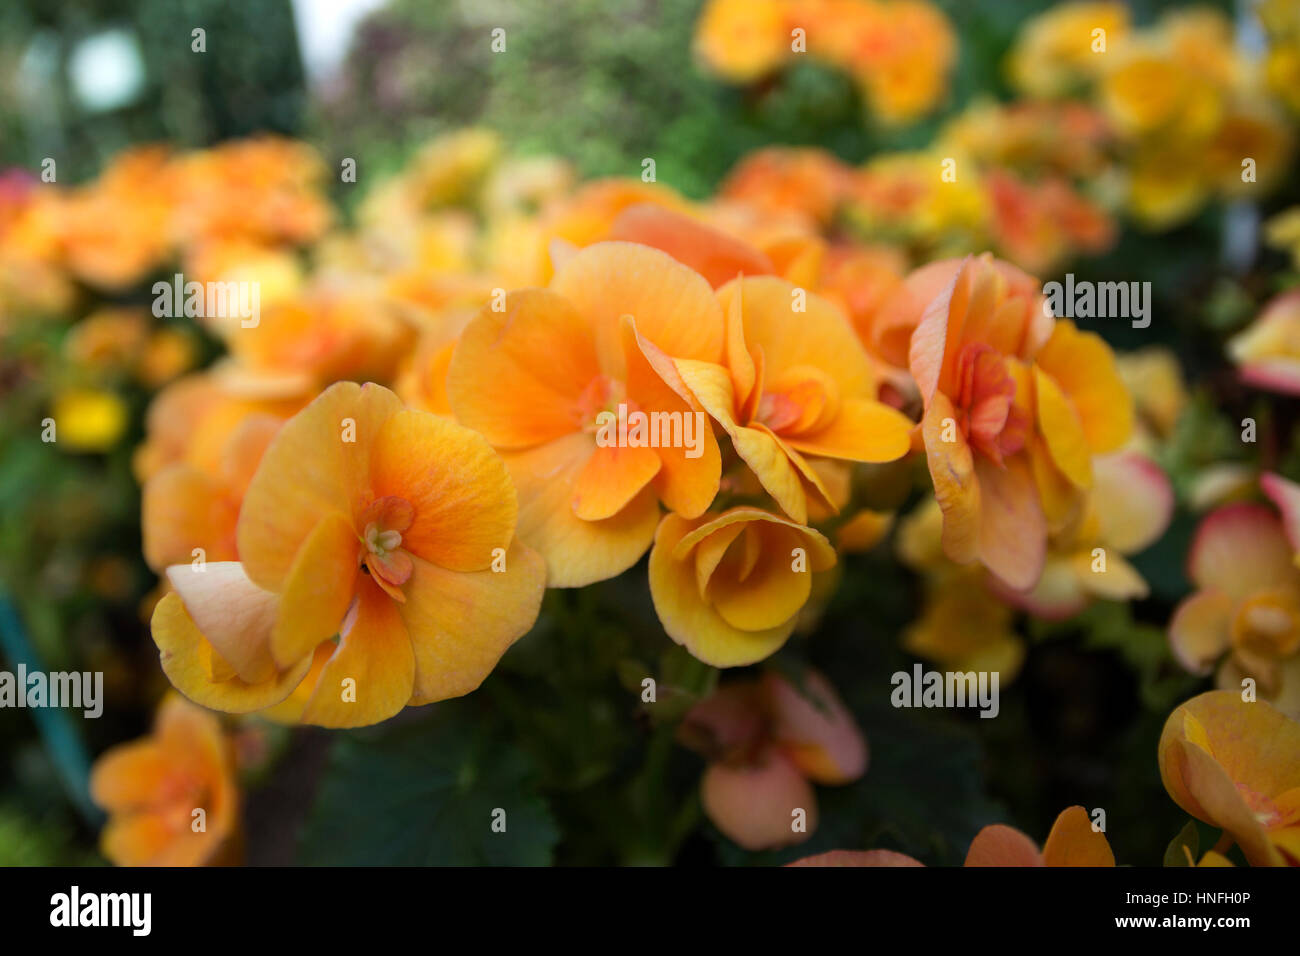 nature spring floral background yellow begonia flower blossom close up selective focus soft focus blurred flowers on background Stock Photo